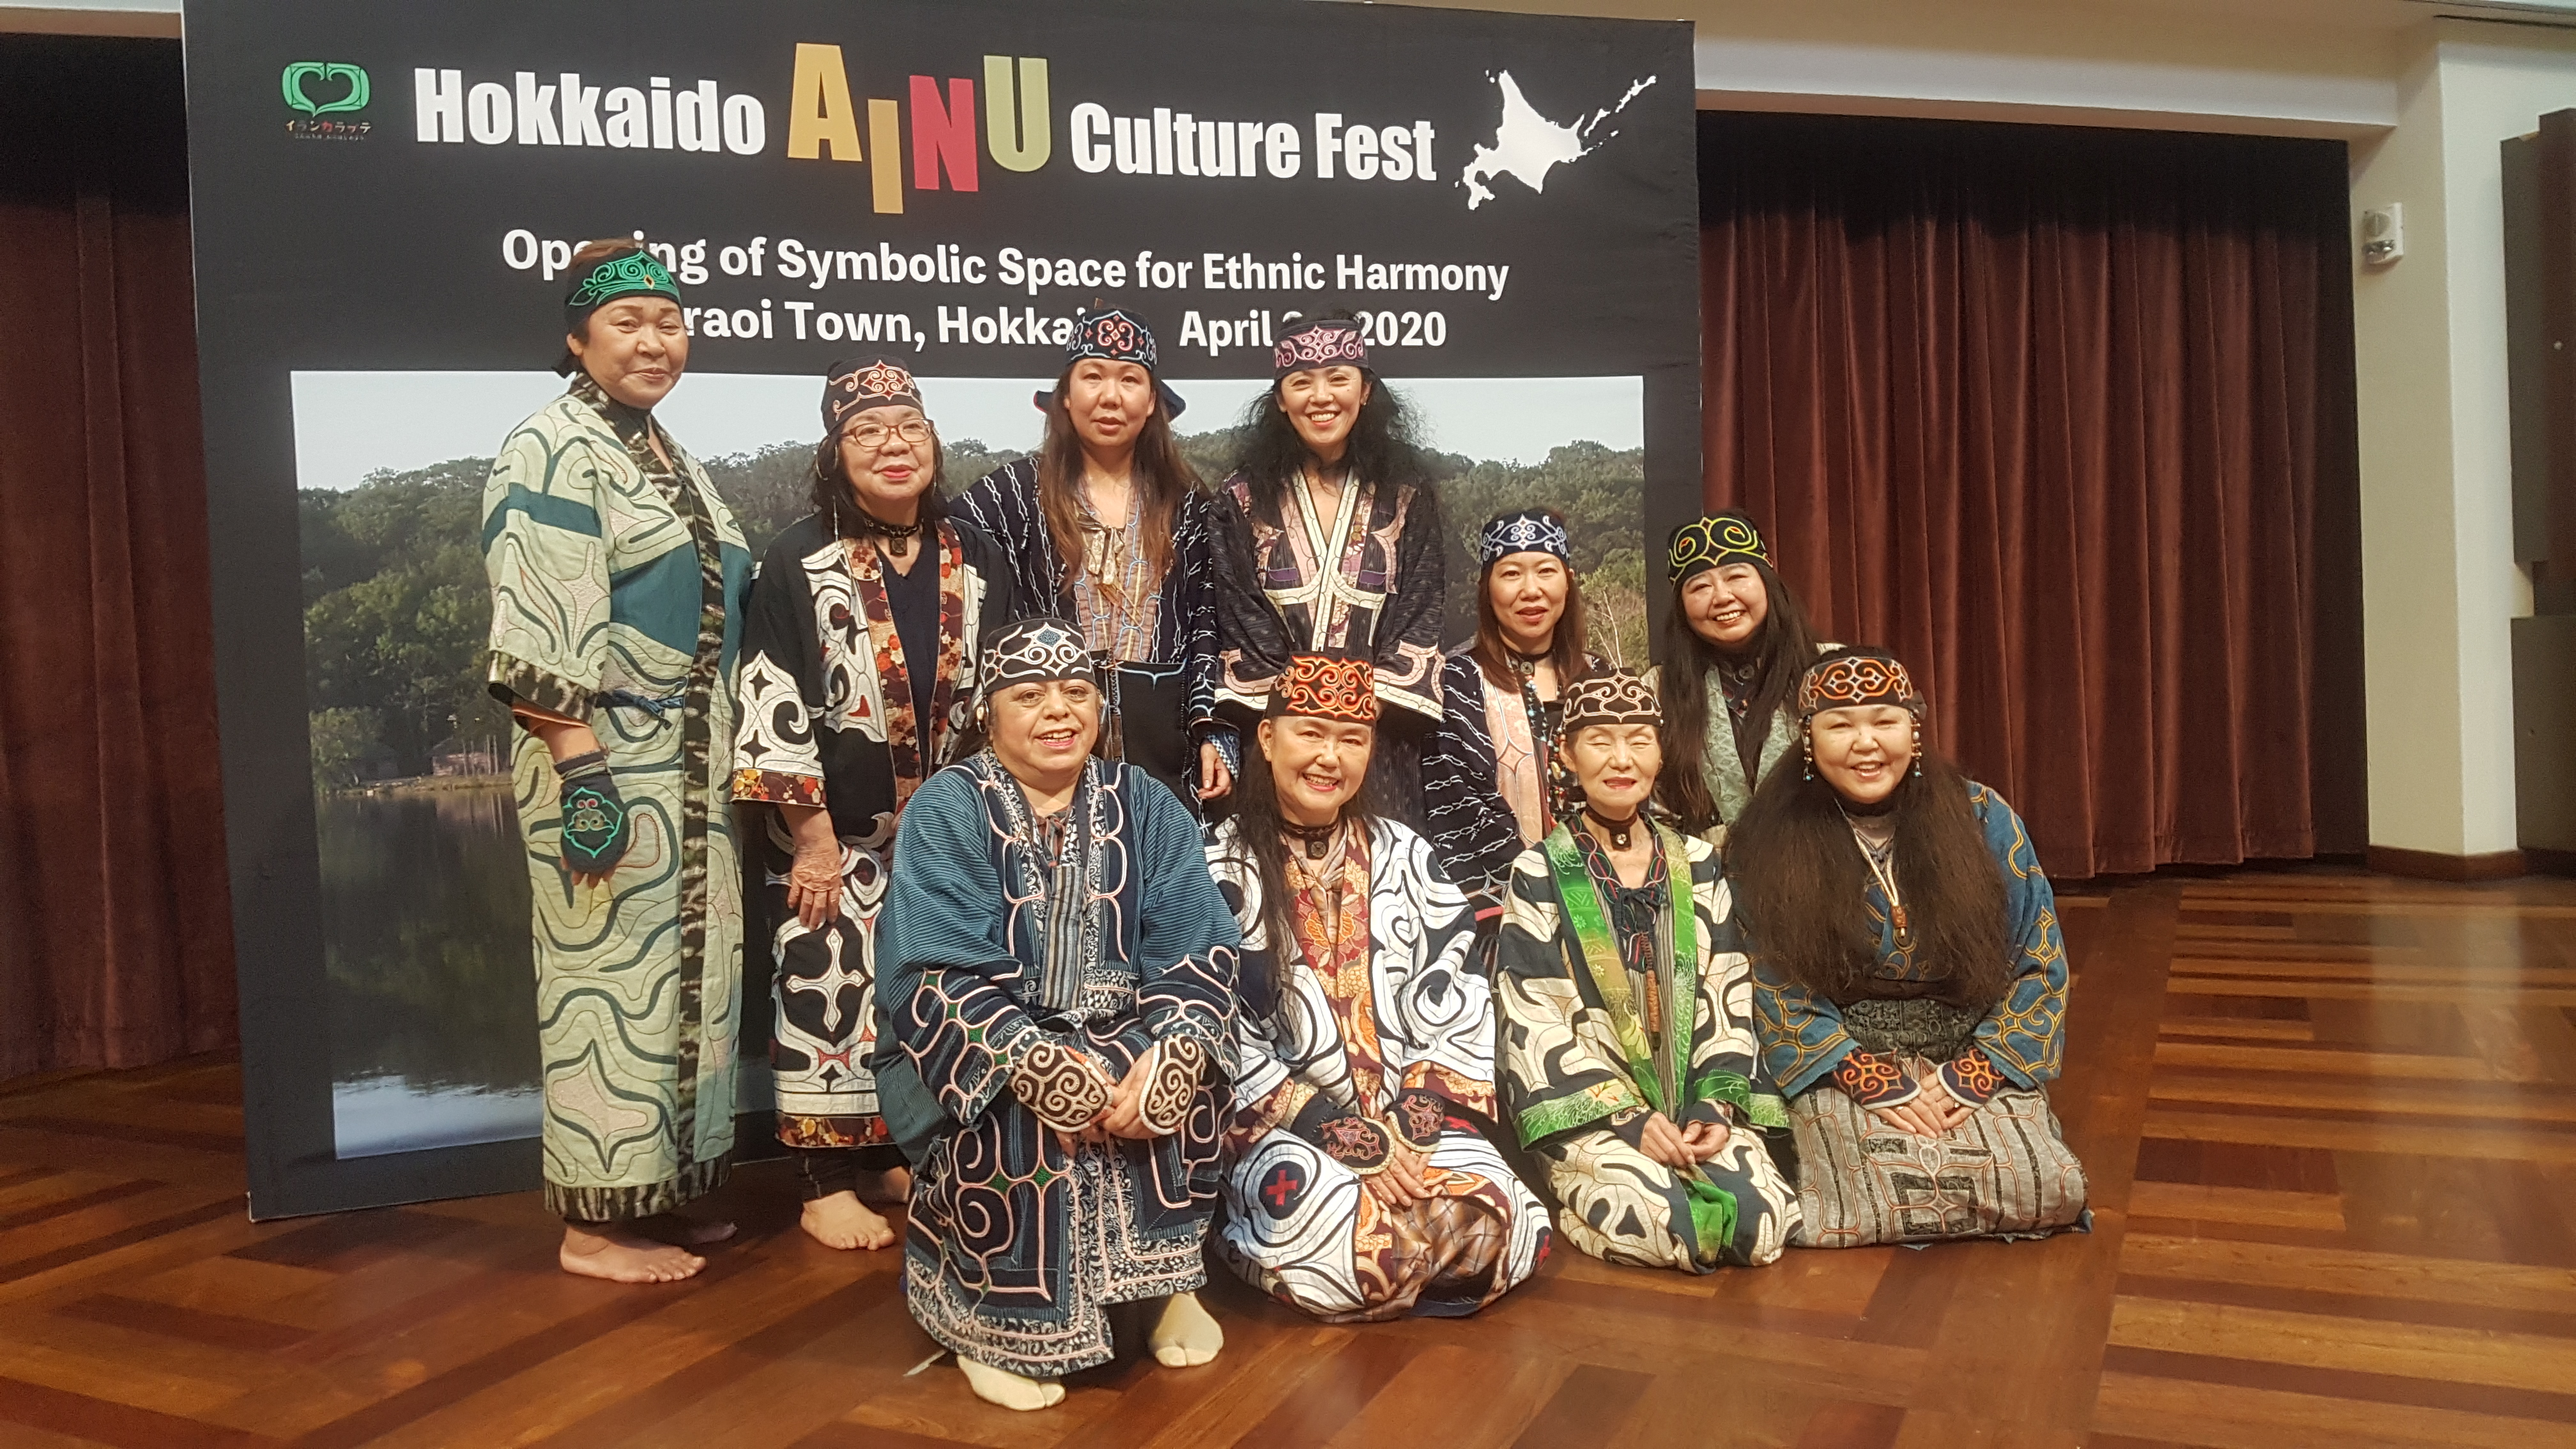 The ten women from the performance group poses on the stage, in front of a poster with the words "Hokkaido Ainu Culture Fest." Words in smaller fonts, with parts blocked by the standing performers, read "Opening of Symbolic Space for Ethnic Harmony, Shiraoi Town, Hokkaido, April 24, 2020." The back row has four women standing and two kneeling on the right, and the front row has four women kneeling. They are dressed in dark blue robes embroidered in colorful threads and cloths.